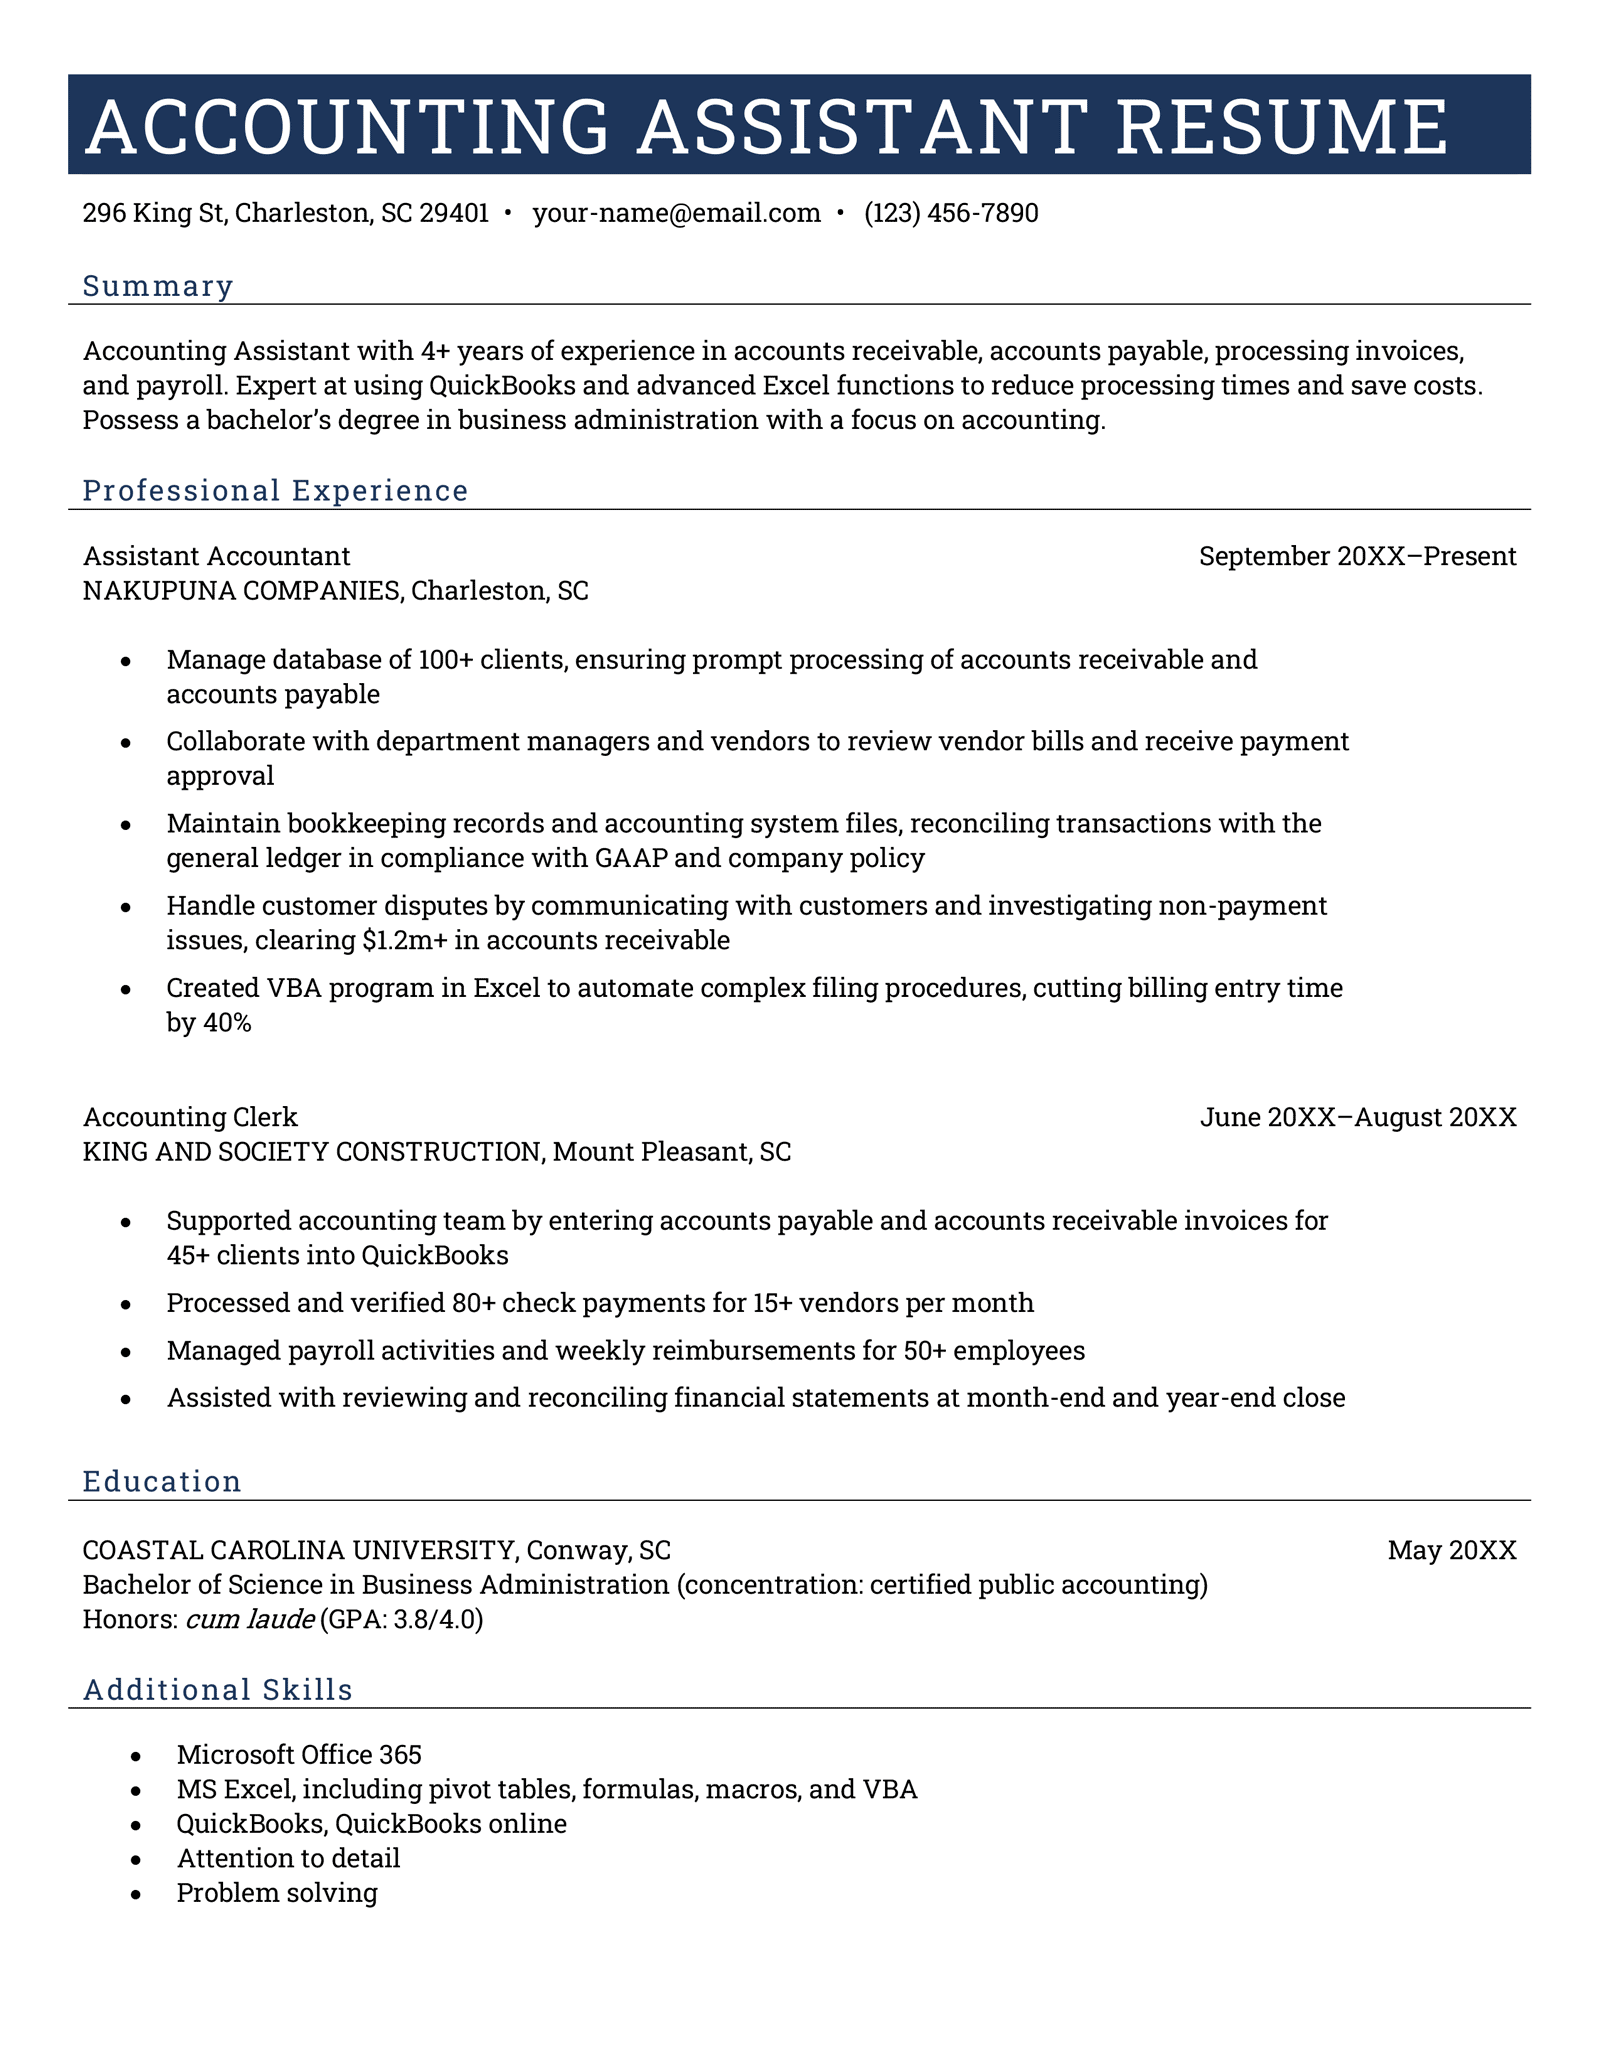 An accounting assistant resume sample with a dark blue header and sections for the applicant’s summary, professional experience, education, and additional skills.